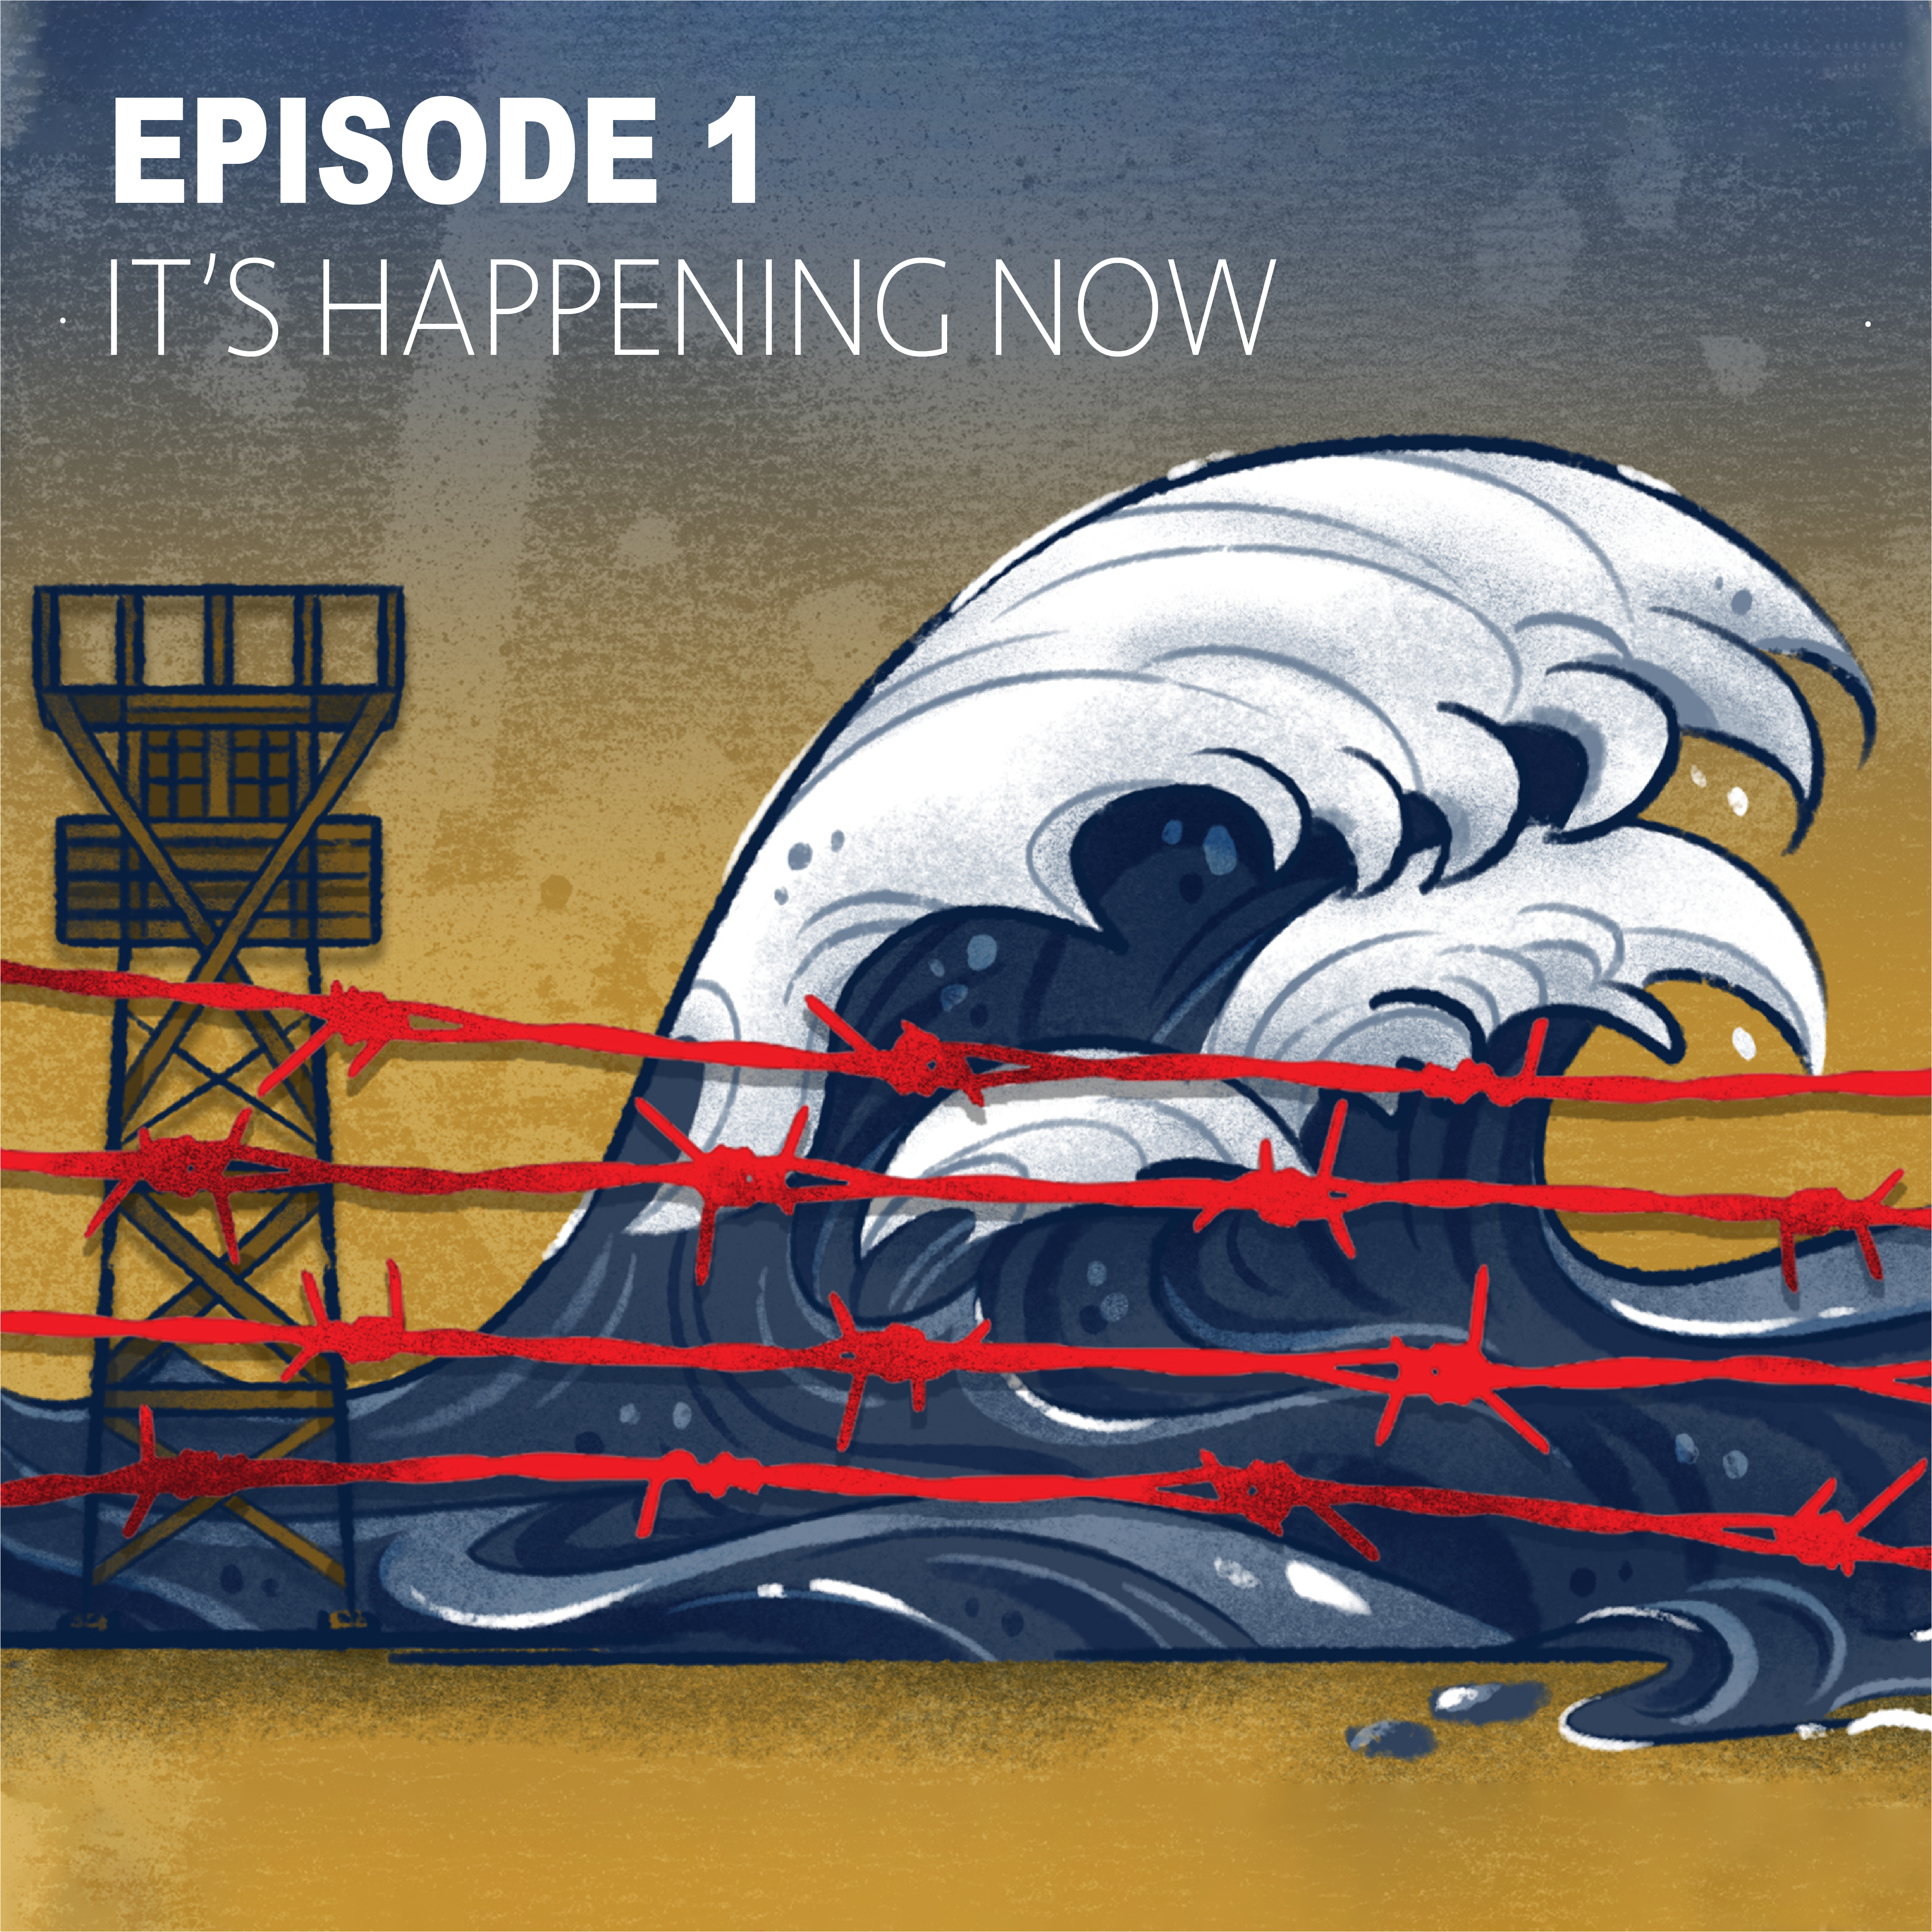 This graphic illustration depicts a large wave and guard tower behind barbed wire with text above that reads, "Episode 1: It's Happening Now."